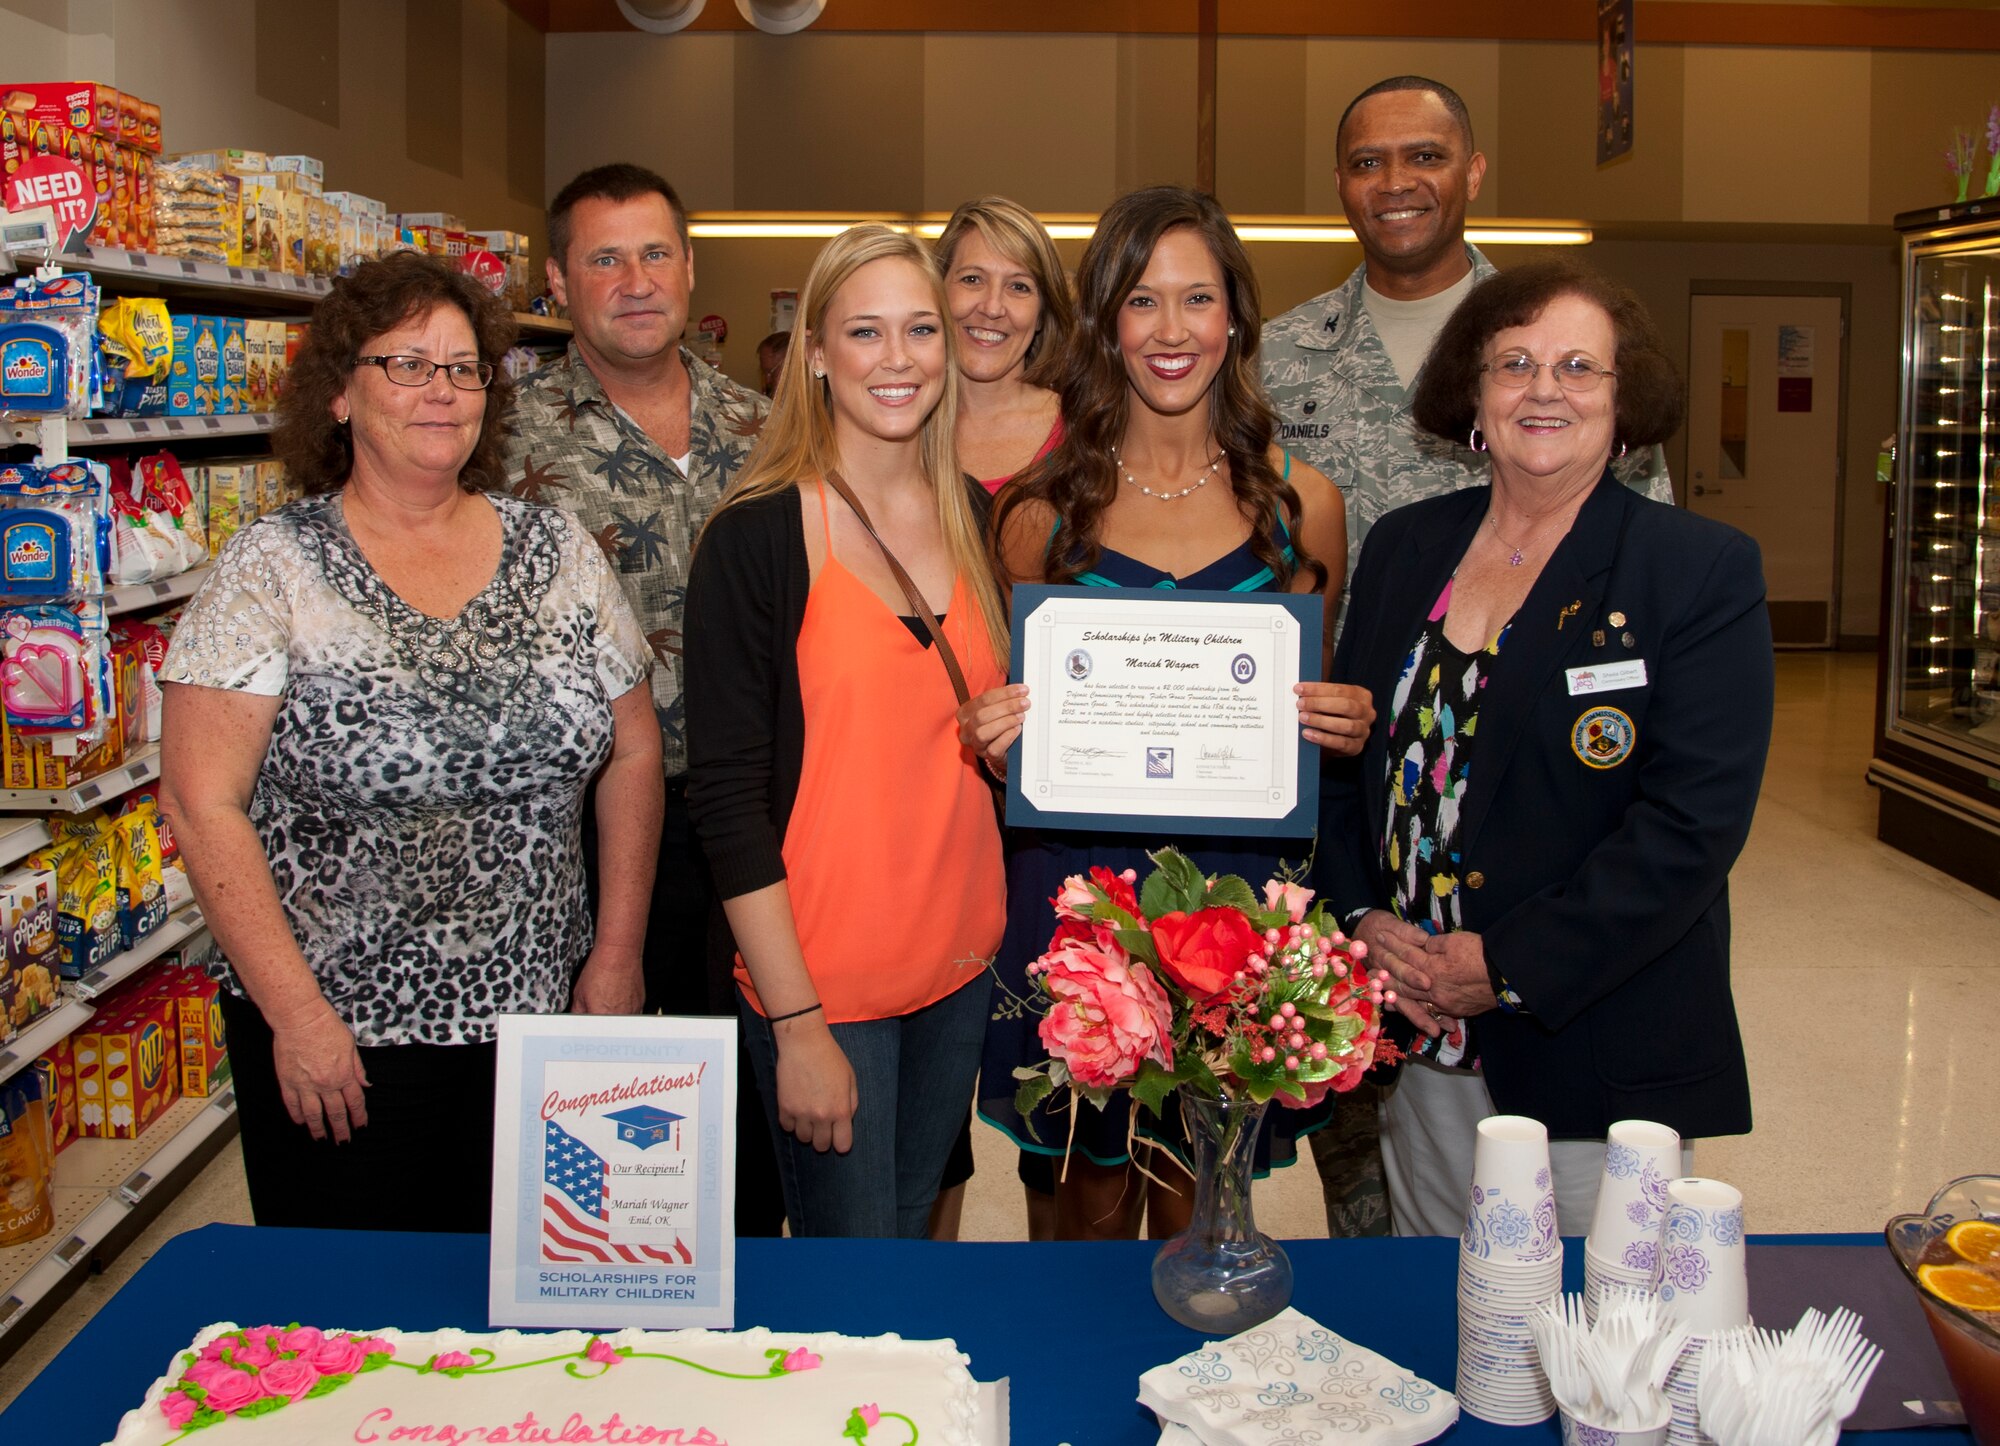 Mariah Wagner (center) holds a certificate for a $2,000 scholarship from the Defense Commissary Agency that was presented June 18 in the Vance Air Force Base Commissary by Sheila Gilbert, the Vance Commissary director, and Col. Christopher Daniels, the 71st Mission Support Group commander. Wagner is the daughter of a retired Air Force lieutenant colonel and just completed her second year at the University of Central Oklahoma in Edmond, Oklahoma. (U.S. Air Force photo / Tech. Sgt. James Bolinger)